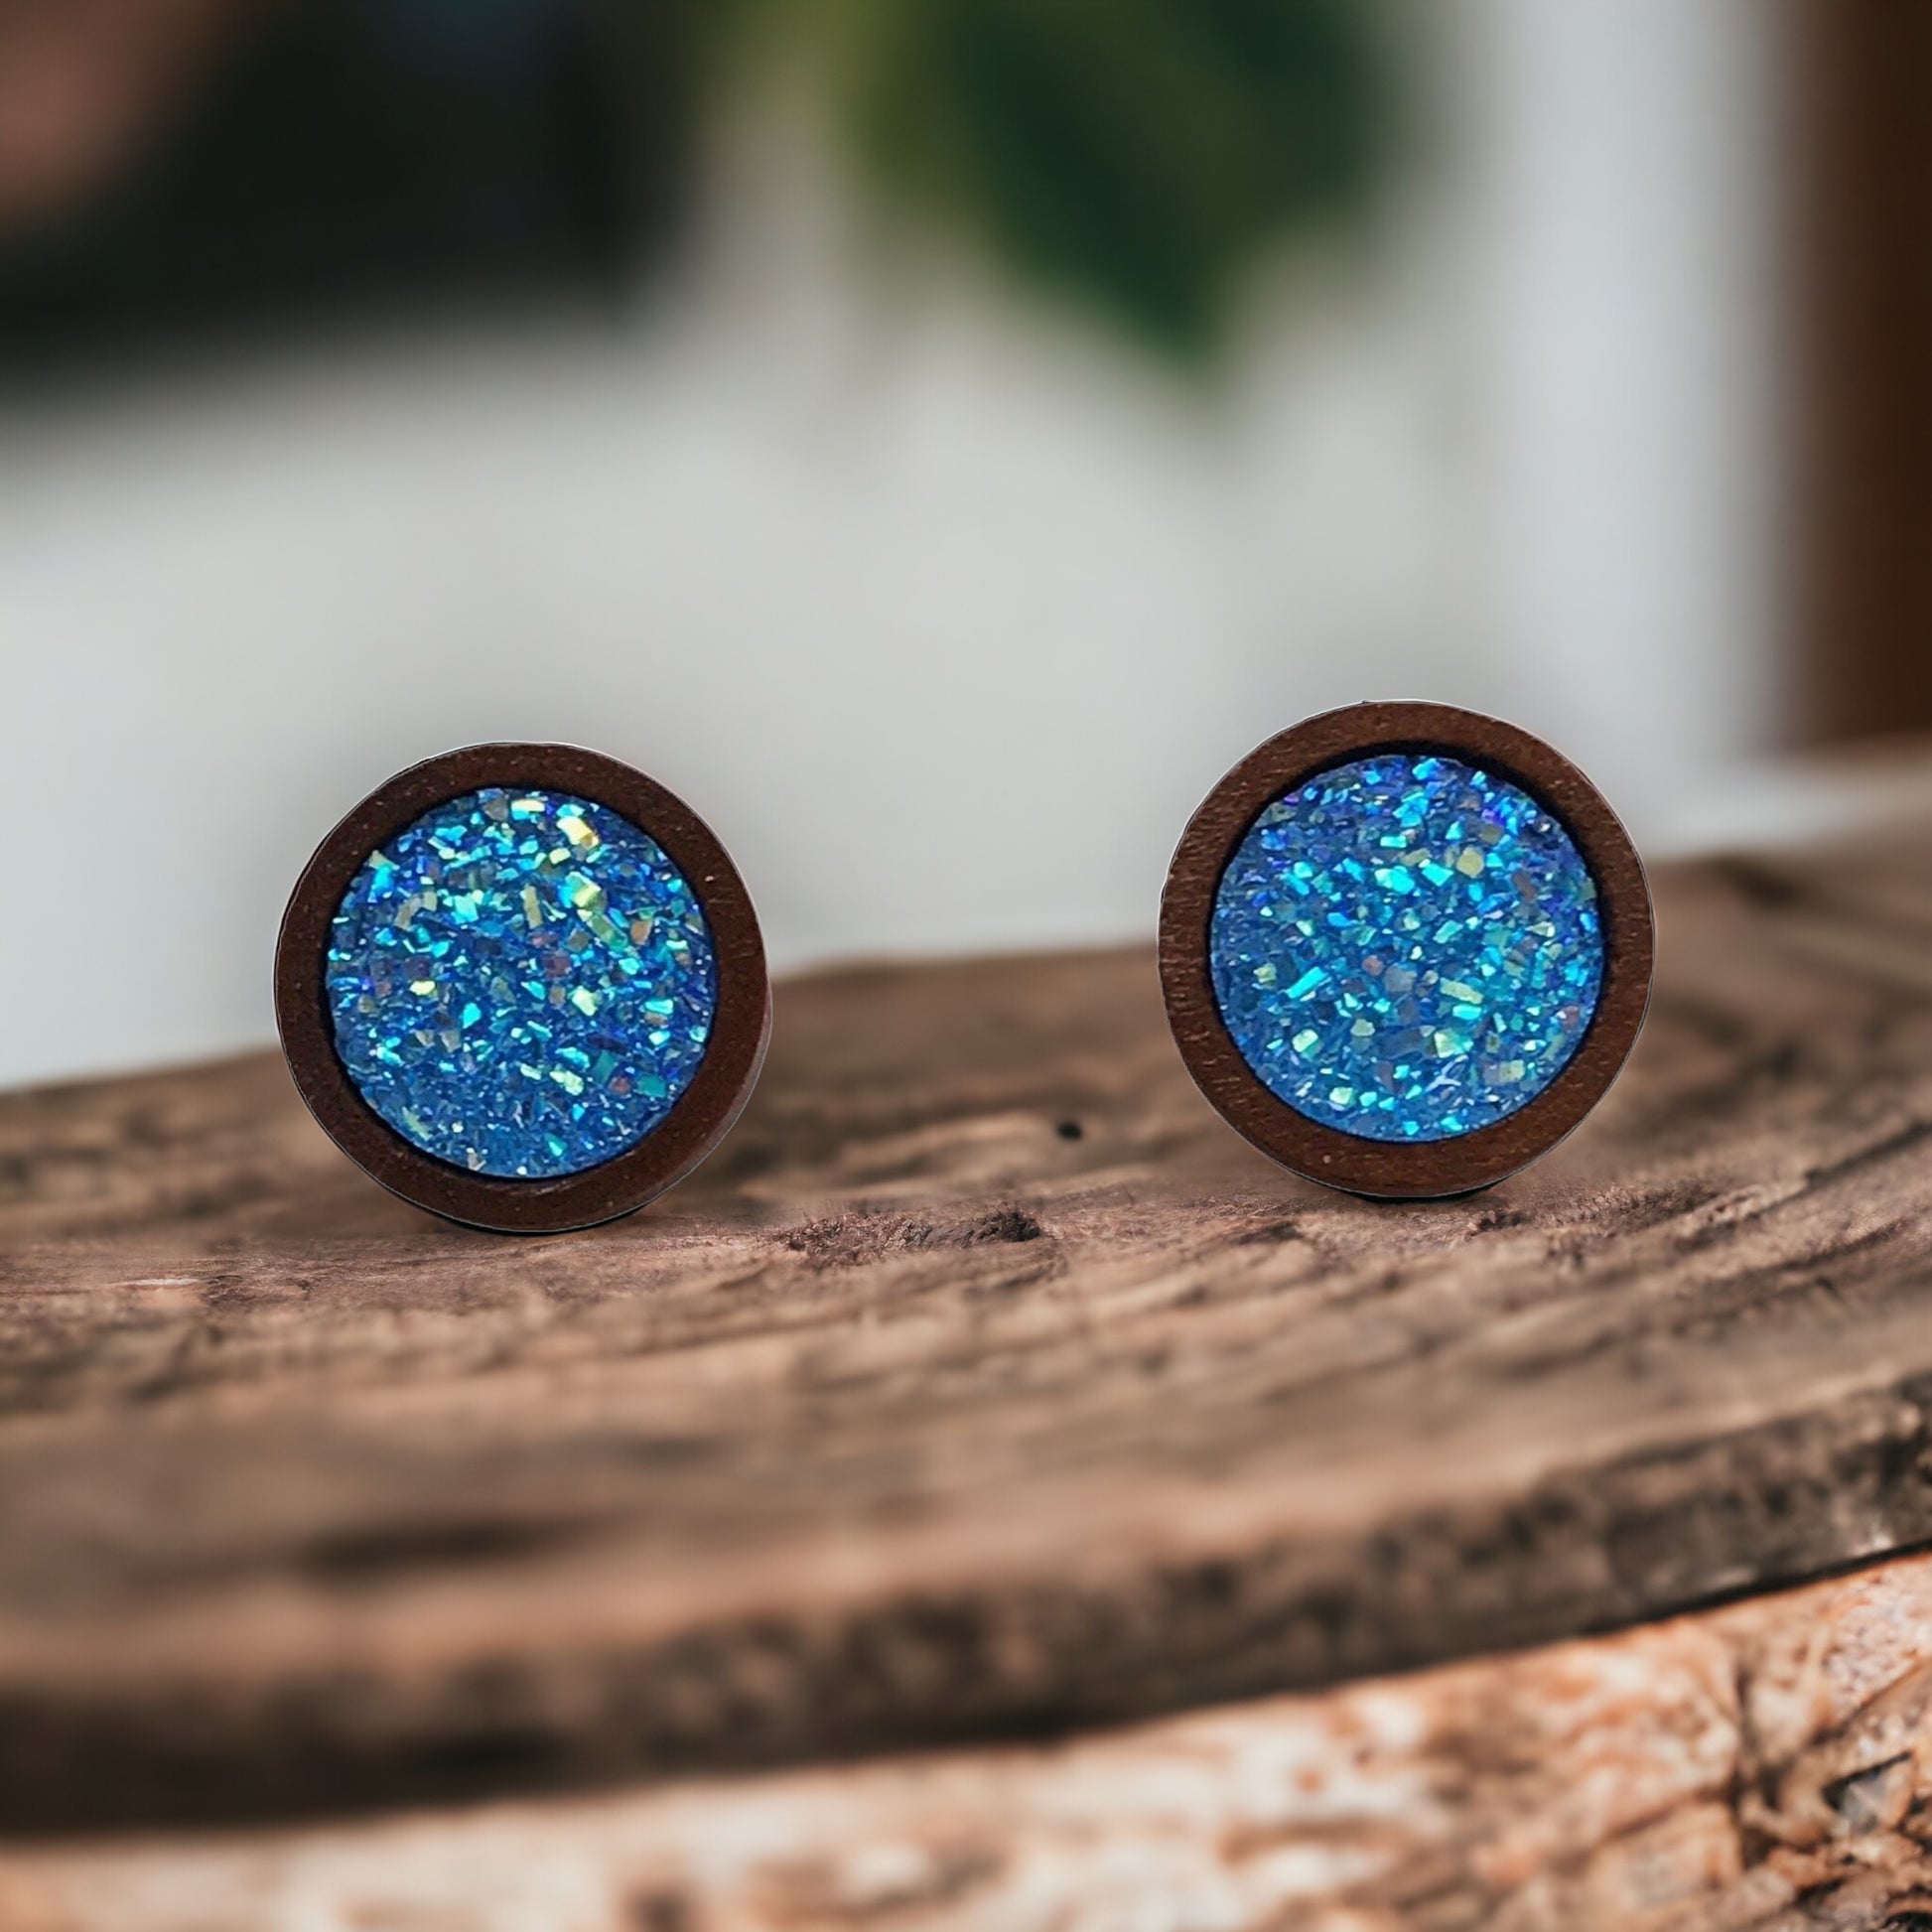 Blue Glitter Druzy Earrings - Boho Chic Studs with Natural Wood Accents